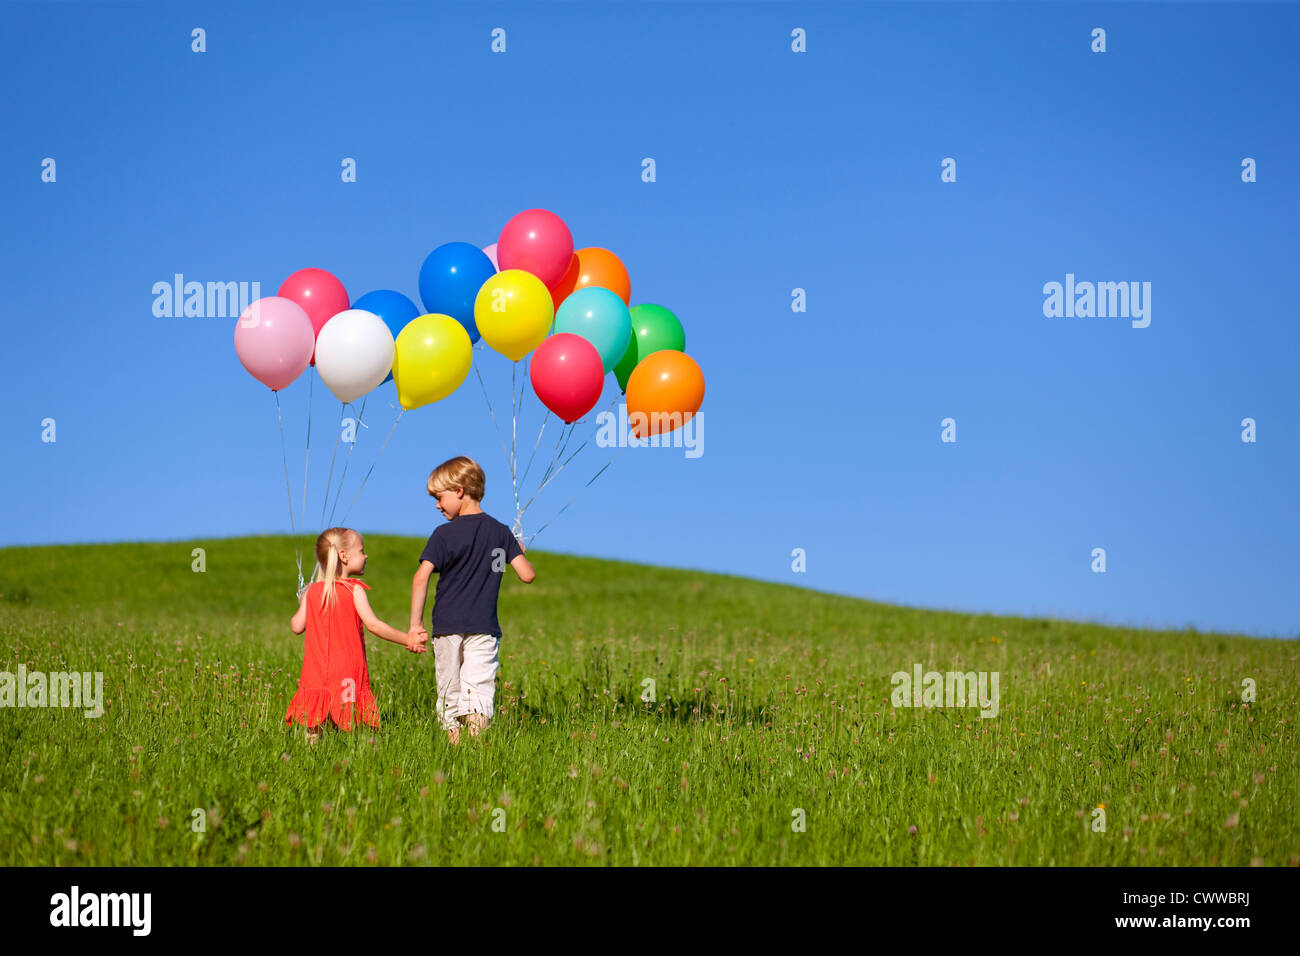 Children with colorful balloons in grass Stock Photo